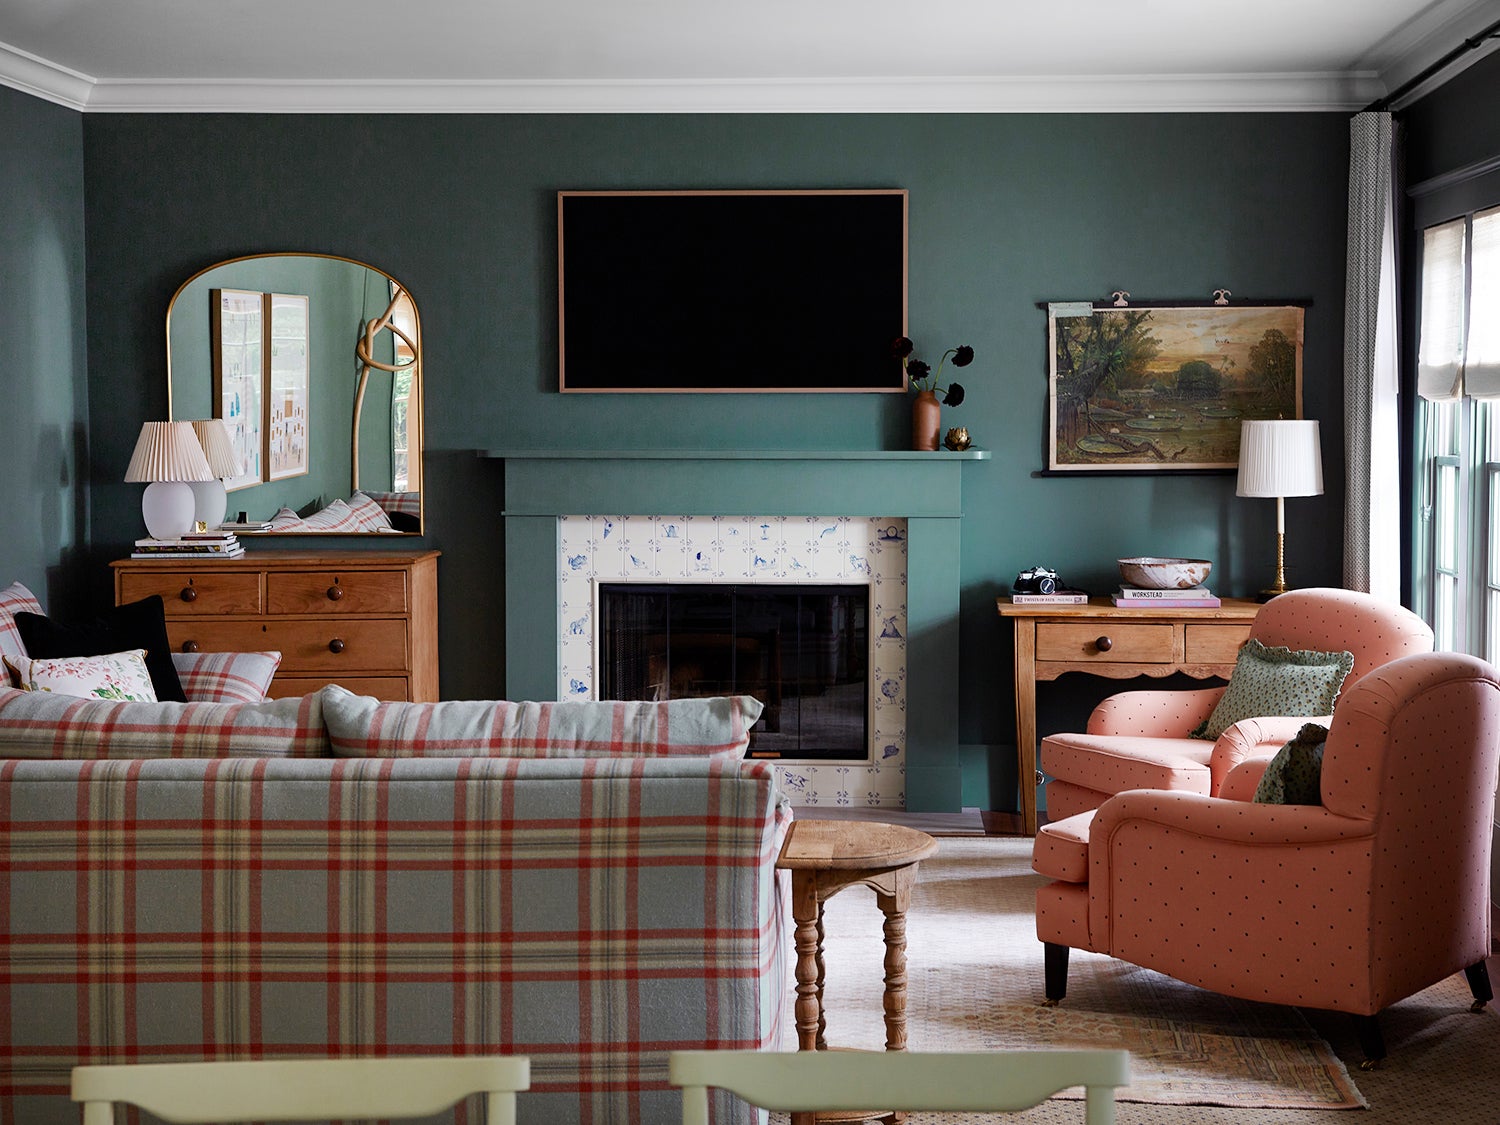 Living room with gray-green walls and plaid sofa